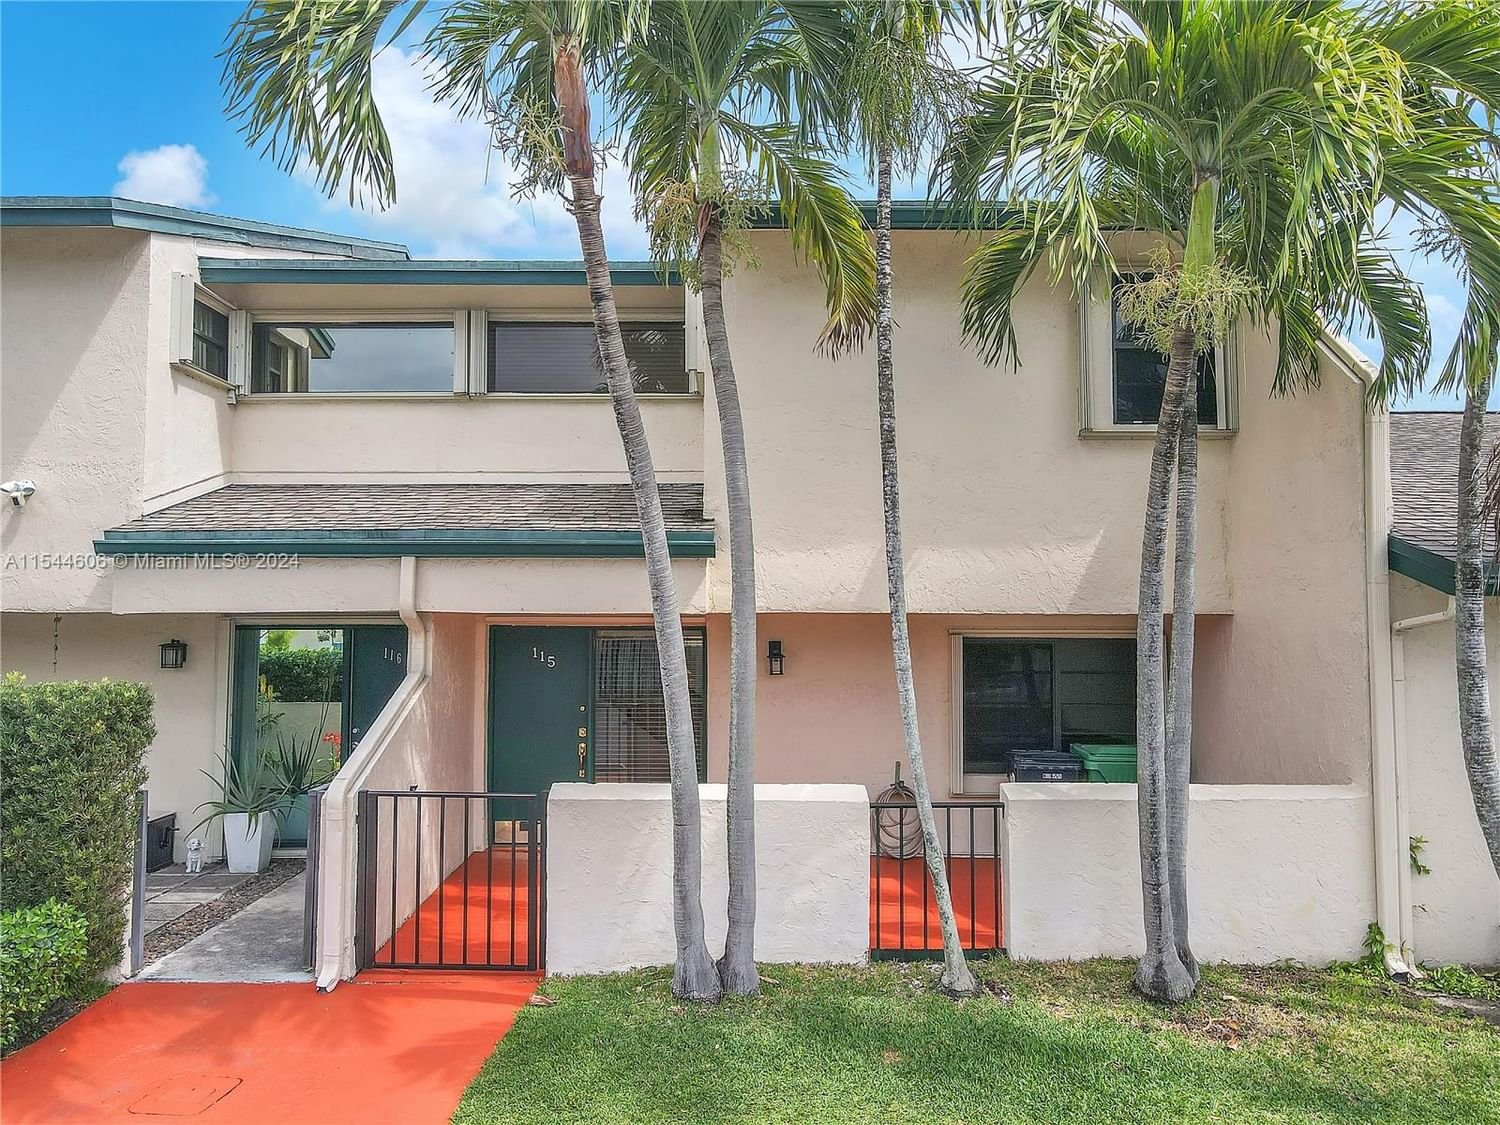 Real estate property located at 10804 72 St #115, Miami-Dade County, SUNSET CONDOR, Miami, FL